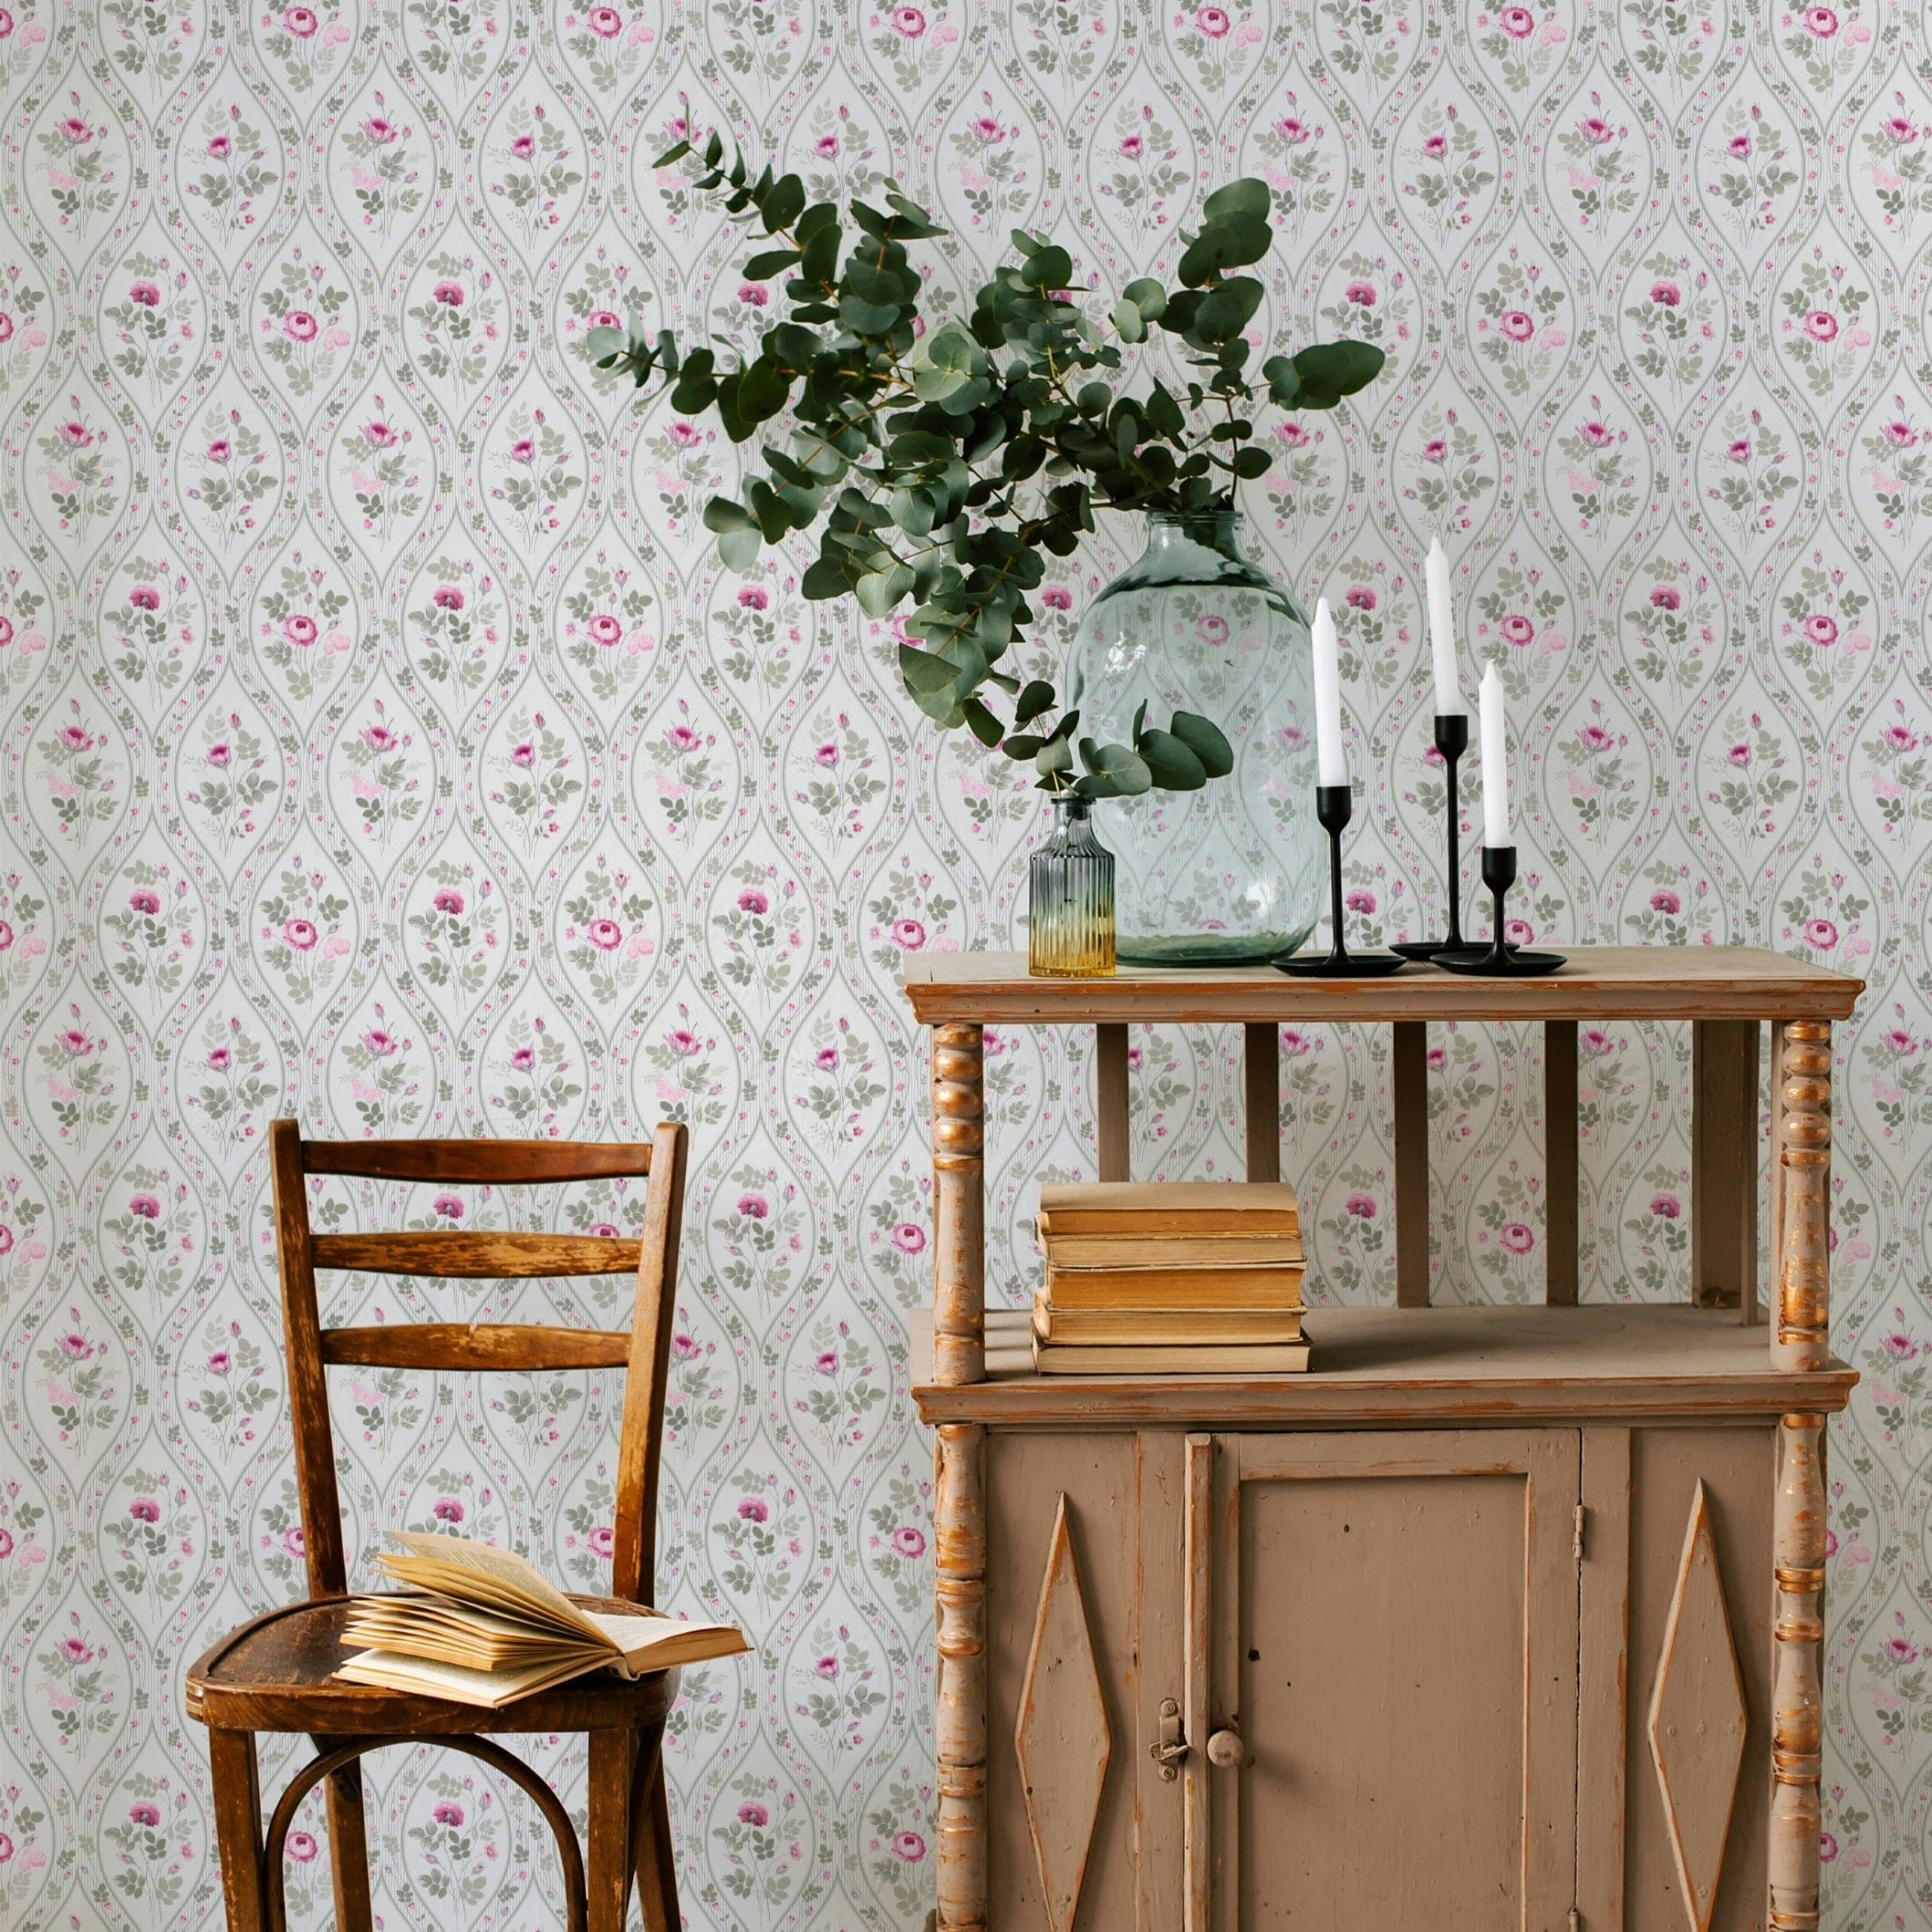 A traditional interior setting showcasing the Vintage Charm Wallpaper, where subtle gray teardrops form a classic backdrop to pink roses and green foliage. The vintage furniture and rustic décor enhance the timeless appeal of the wallpaper, creating a cozy and nostalgic space.